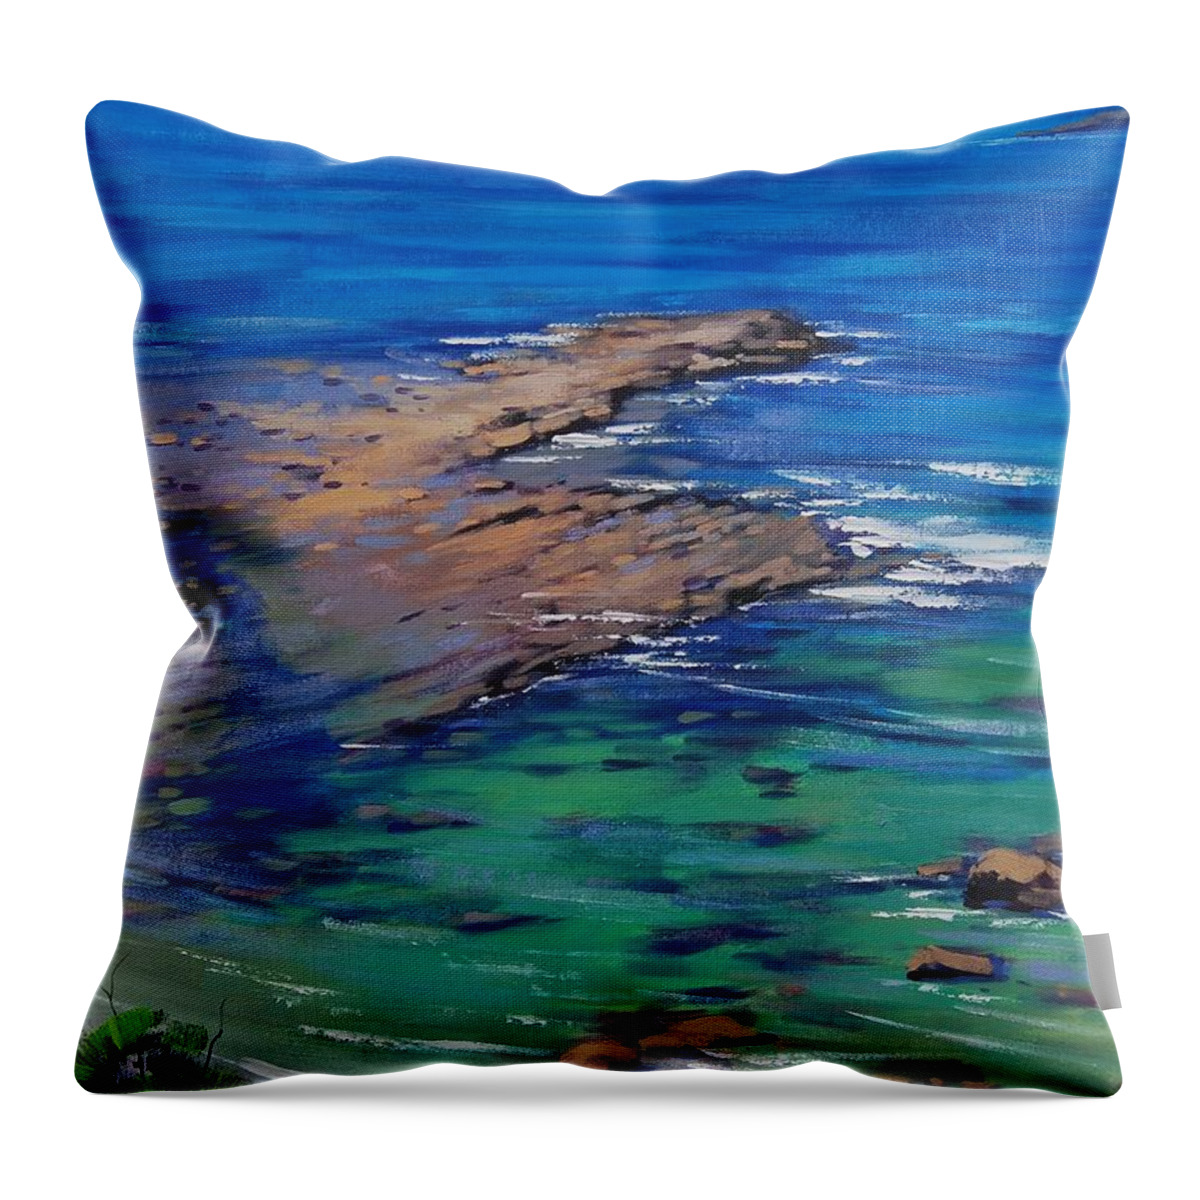 Turquoise Seascape Throw Pillow featuring the painting Turquoise Seascape by Graham Gercken